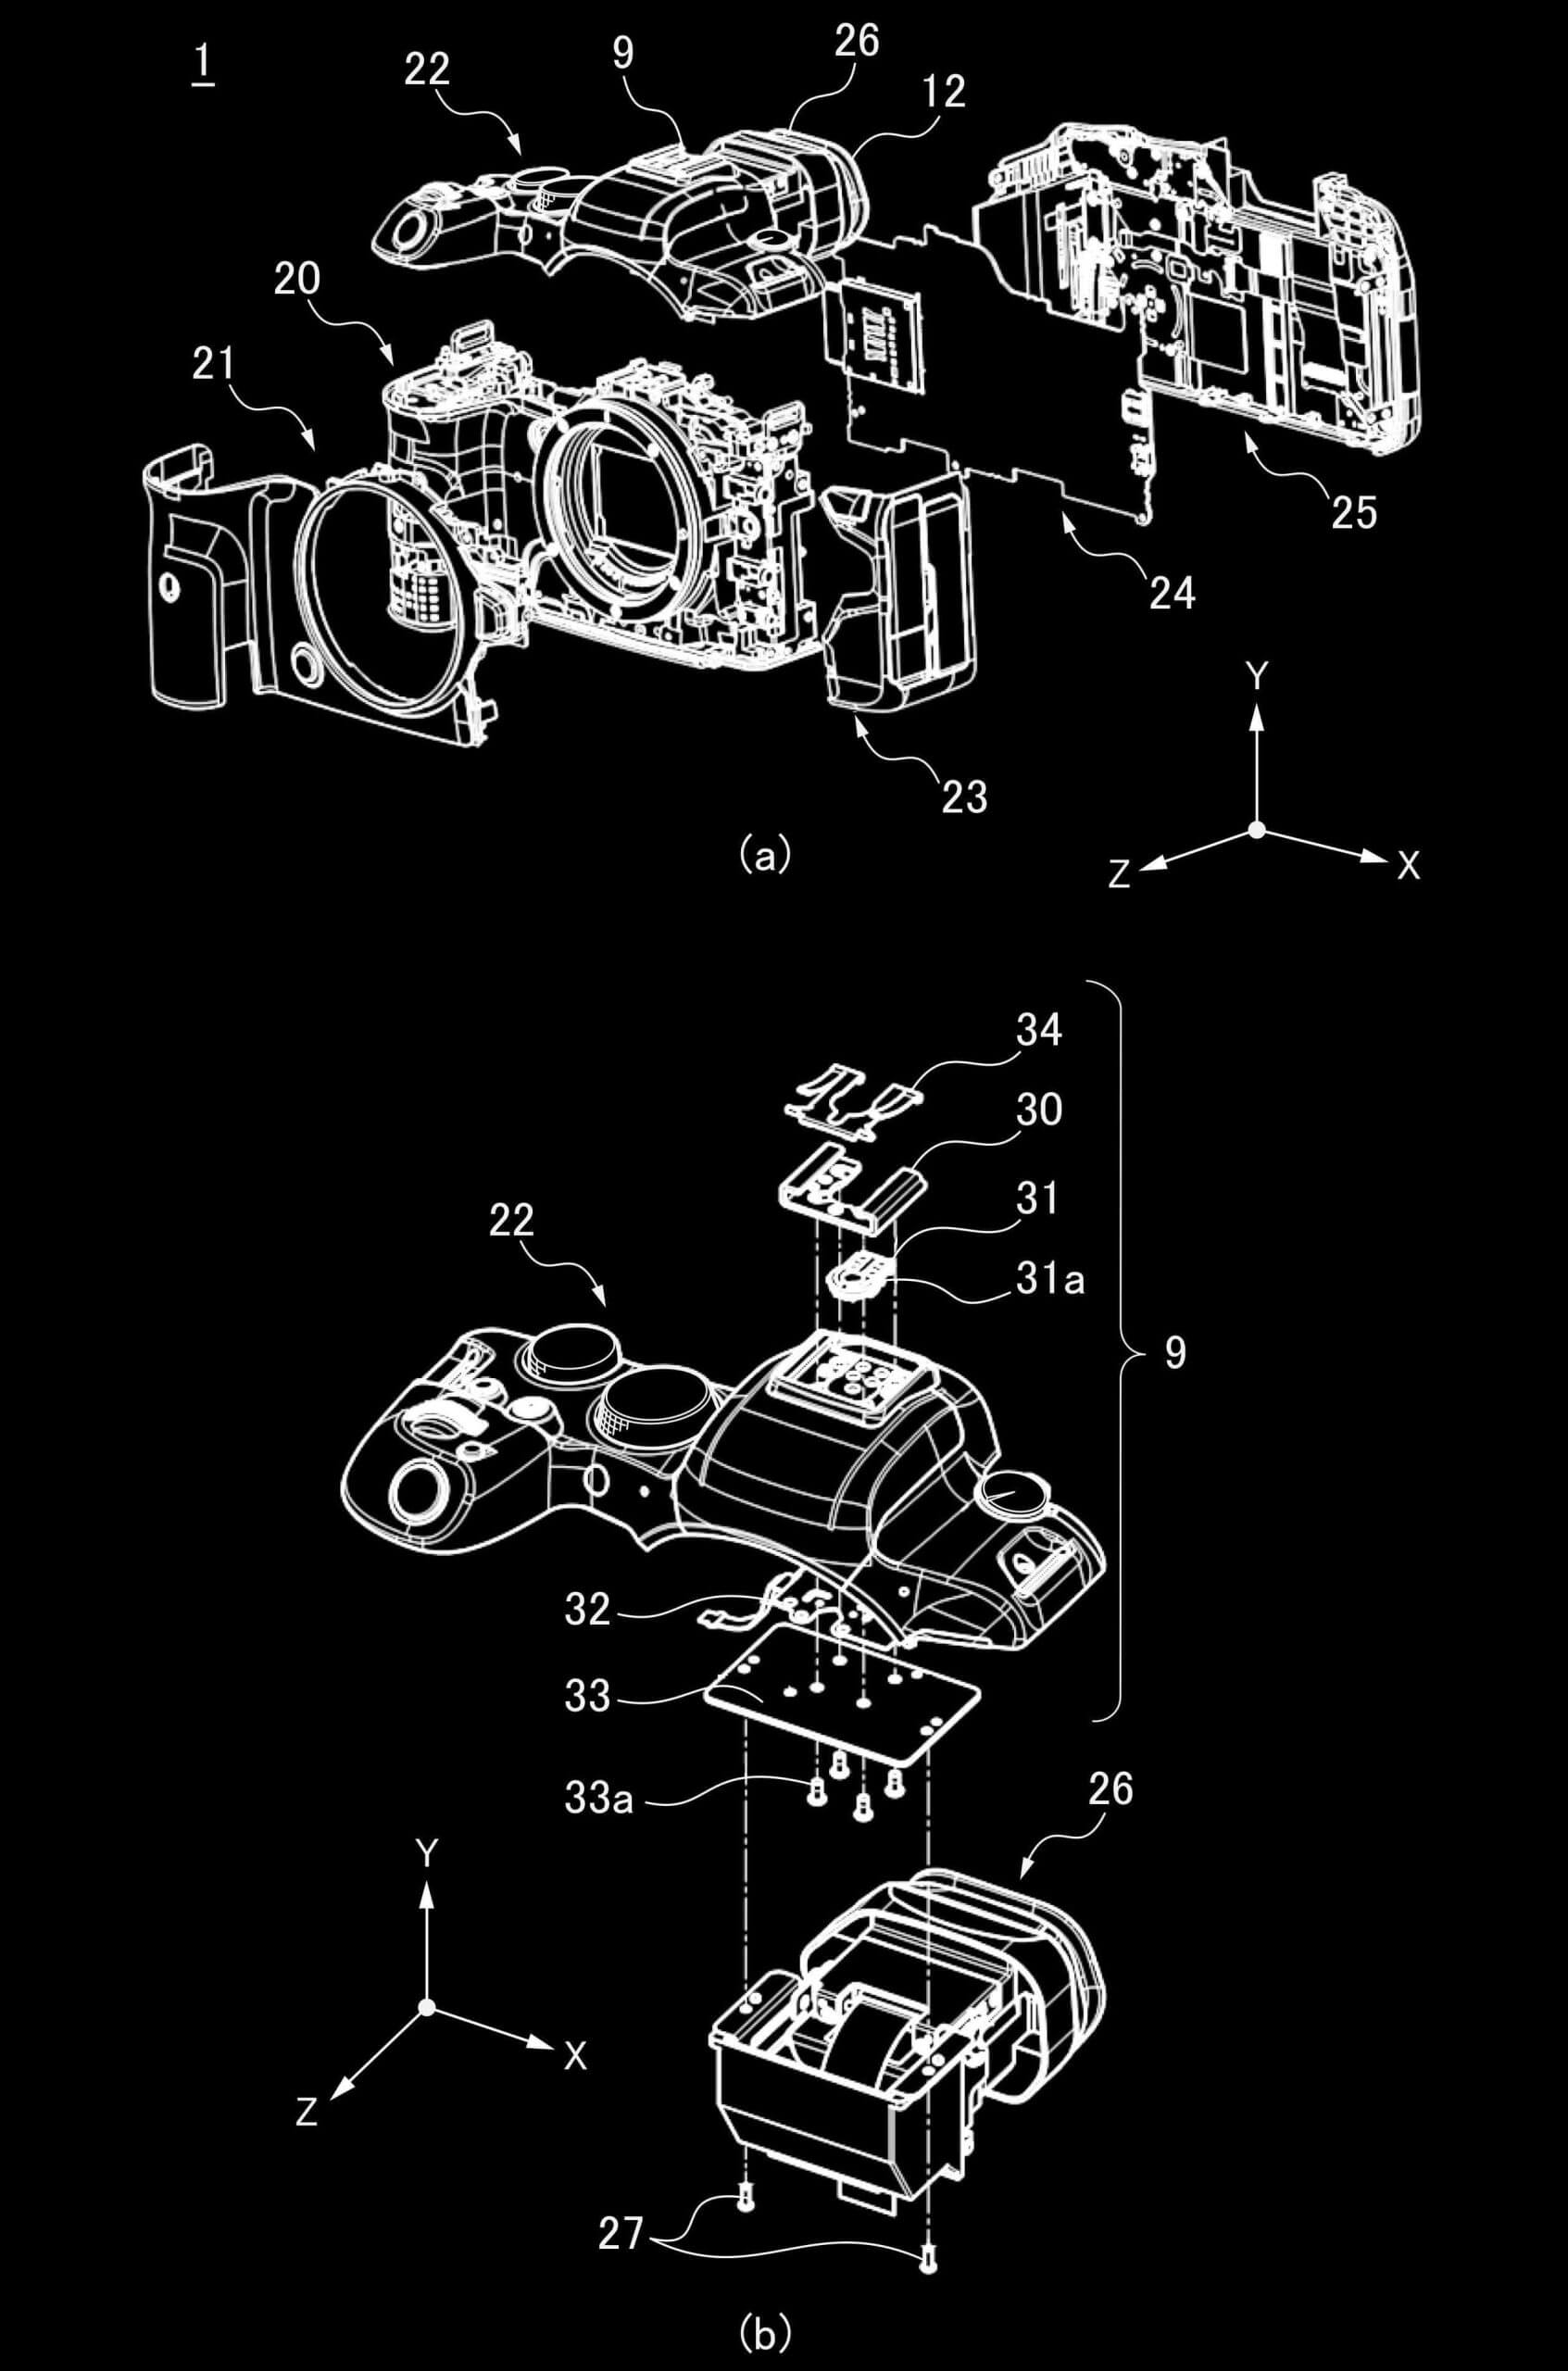 patentevftilt03 scaled - Canon patents a built-in tilting viewfinder